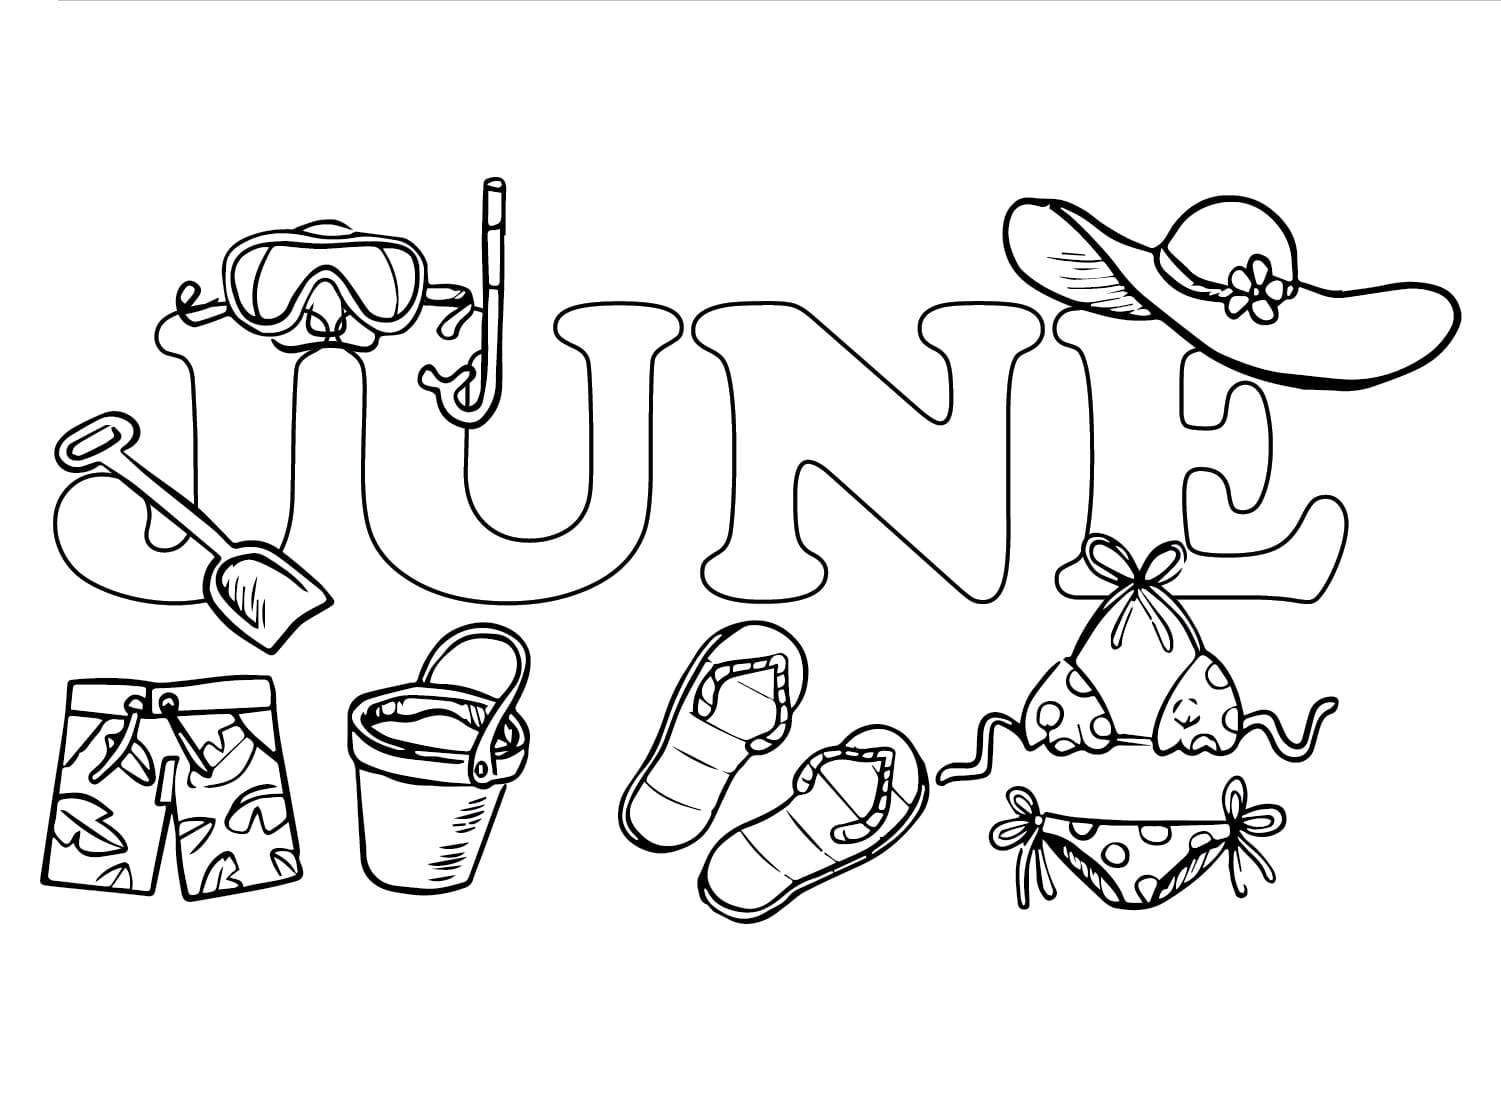 June Summer Beach coloring page - Download, Print or Color Online for Free